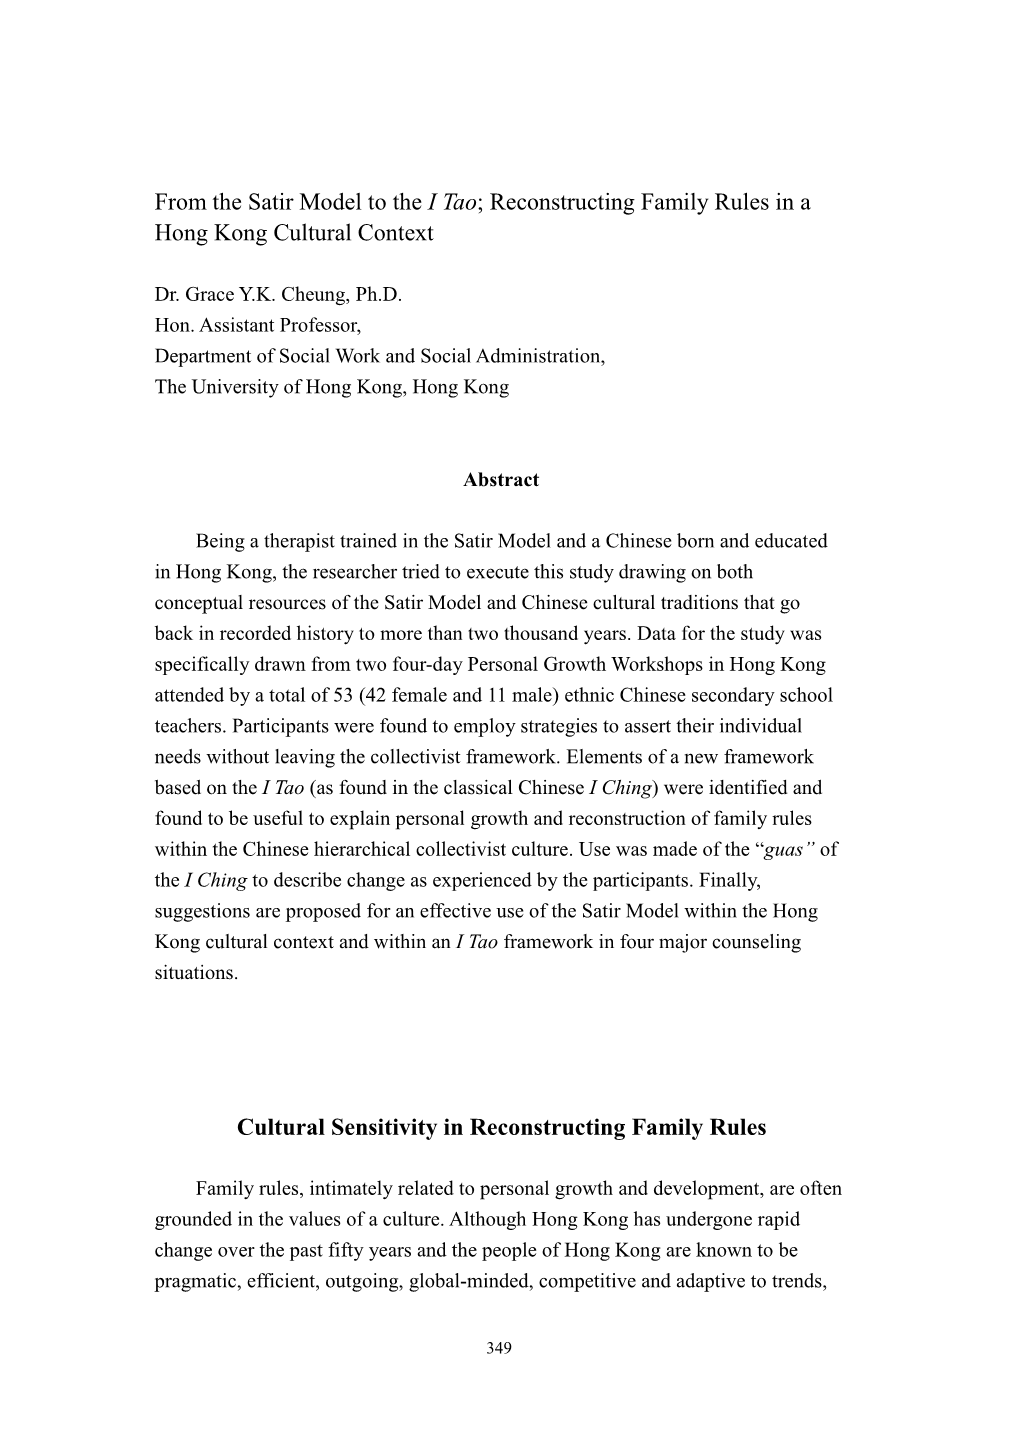 From the Satir Model to the I Tao; Reconstructing Family Rules in a Hong Kong Cultural Context